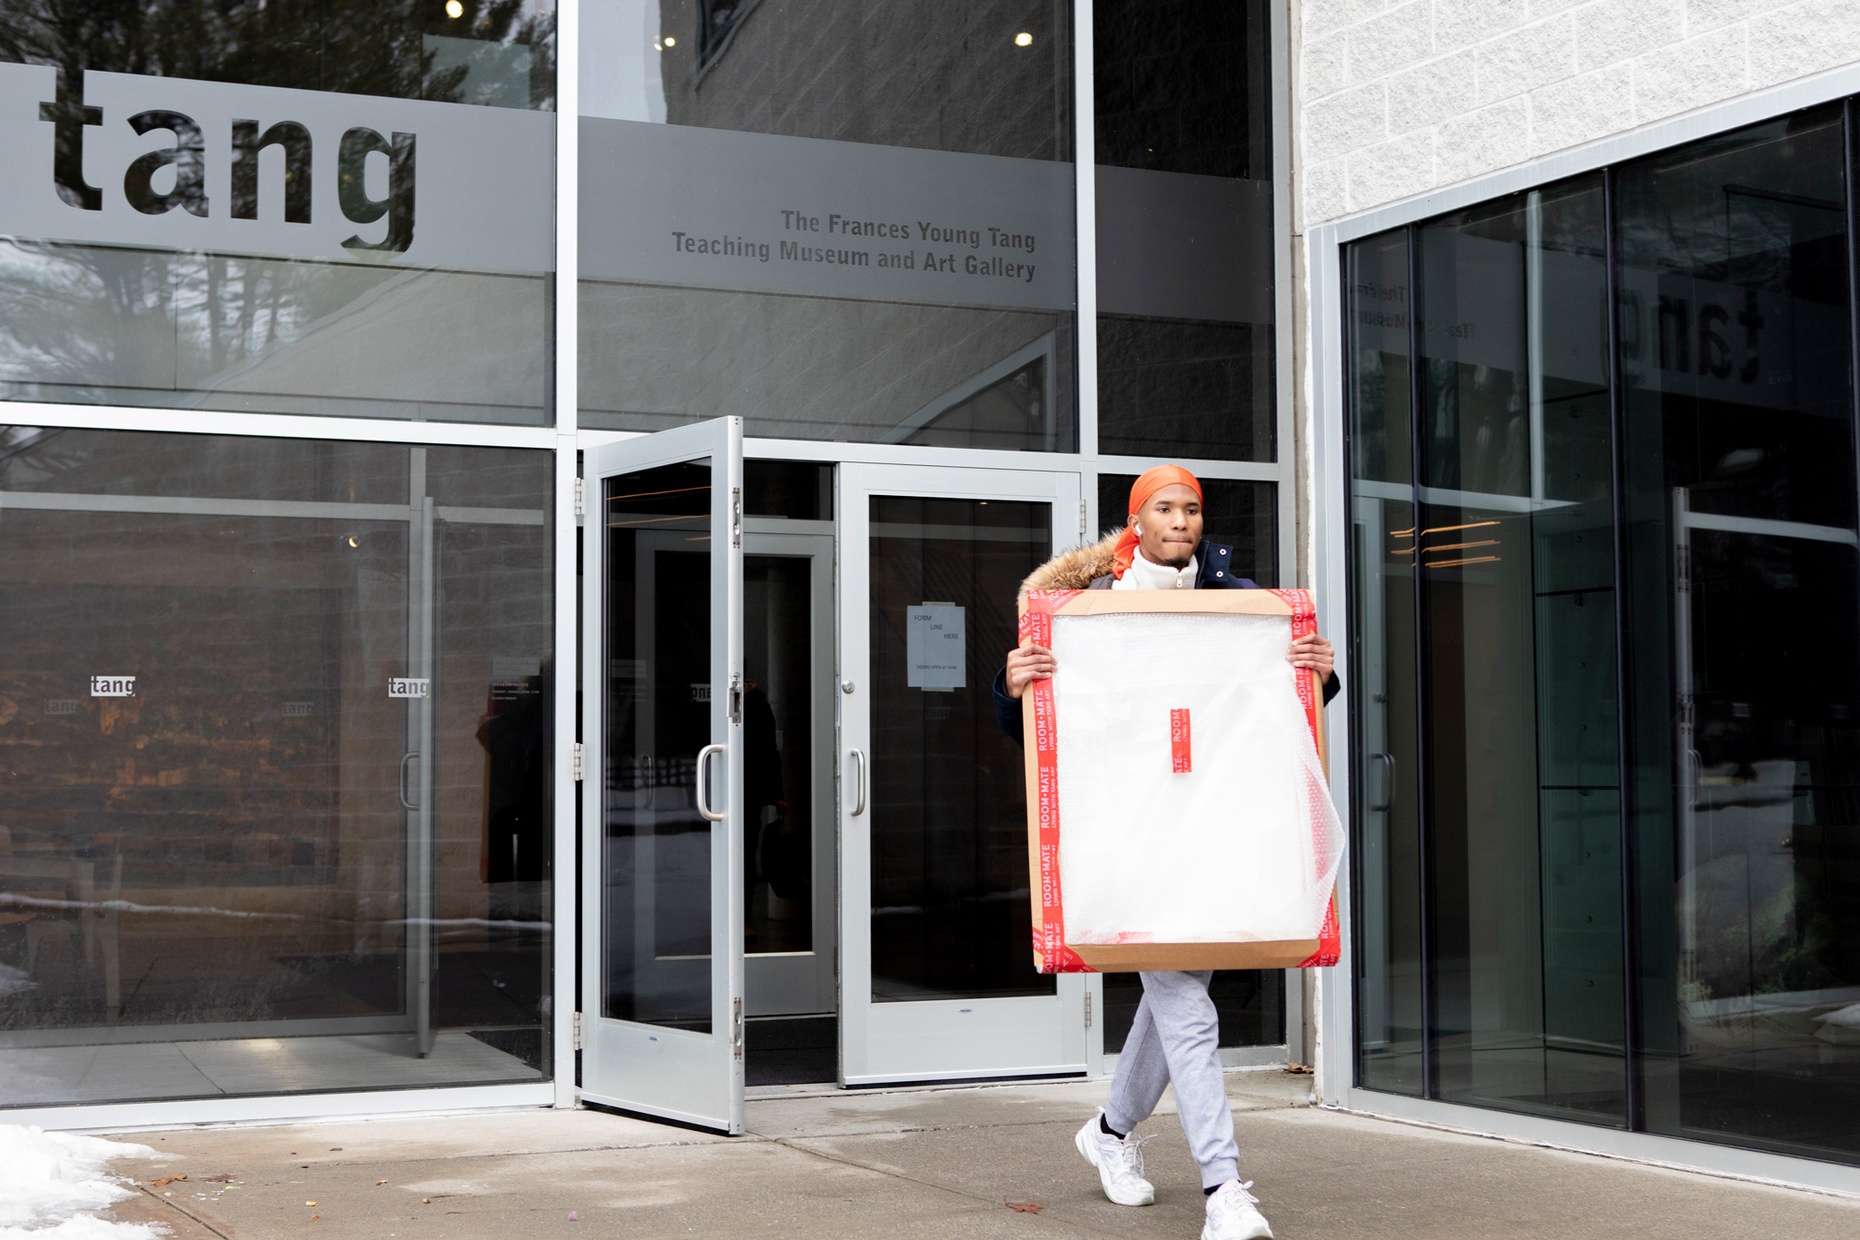 A student is carrying a packaged artwork leaving the Tang.